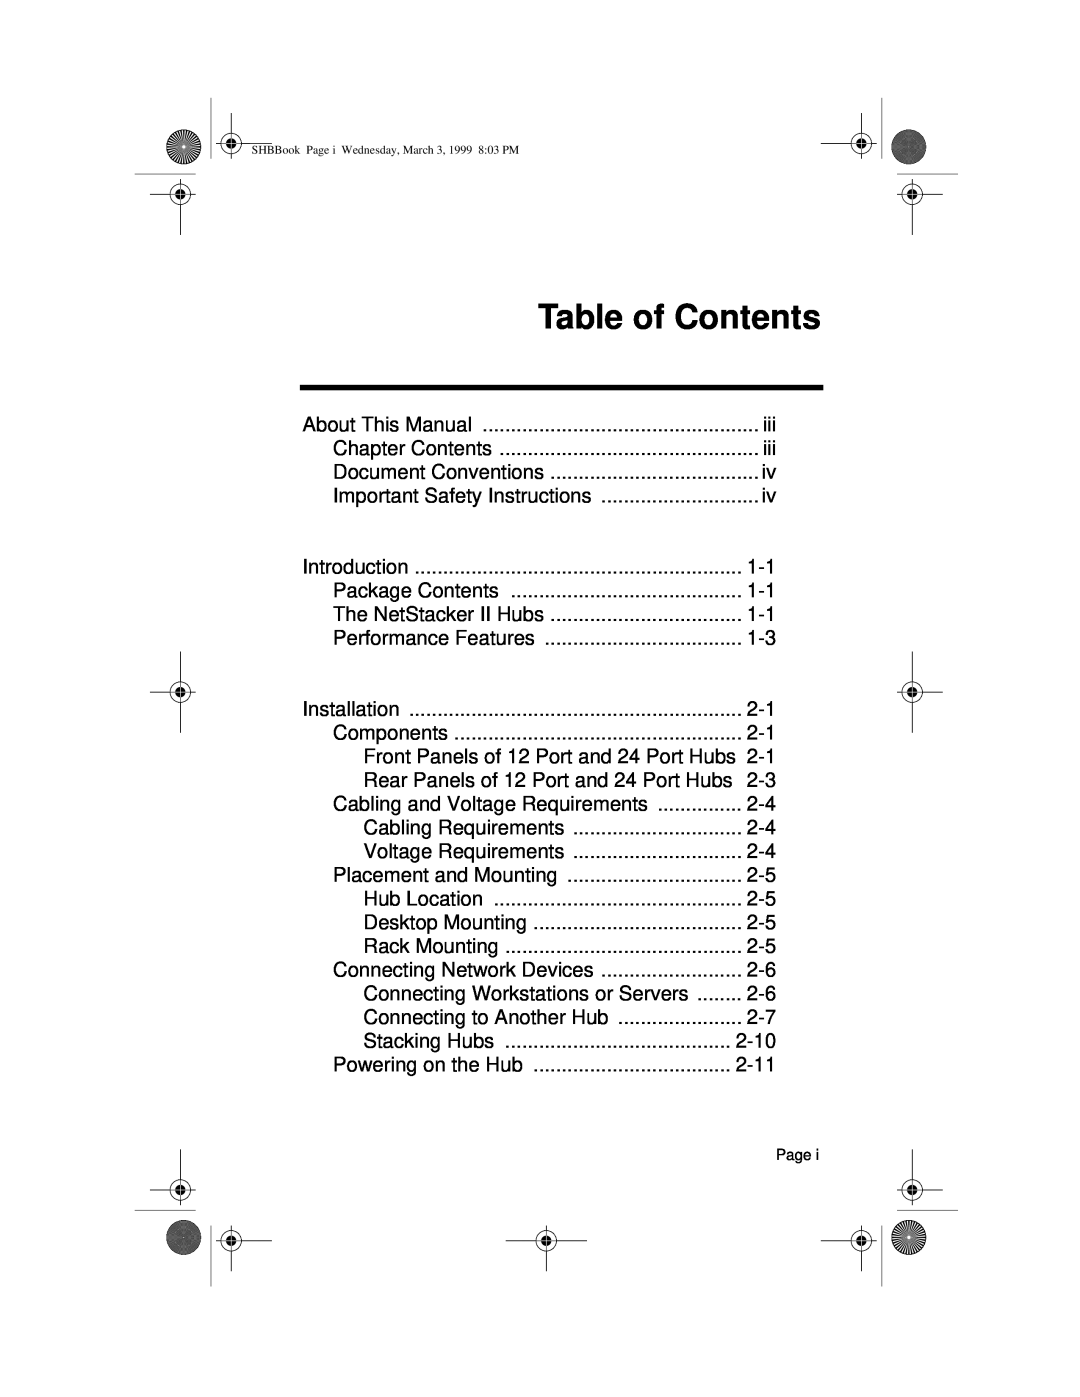 Asante Technologies II user manual Table of Contents, Document Conventions 